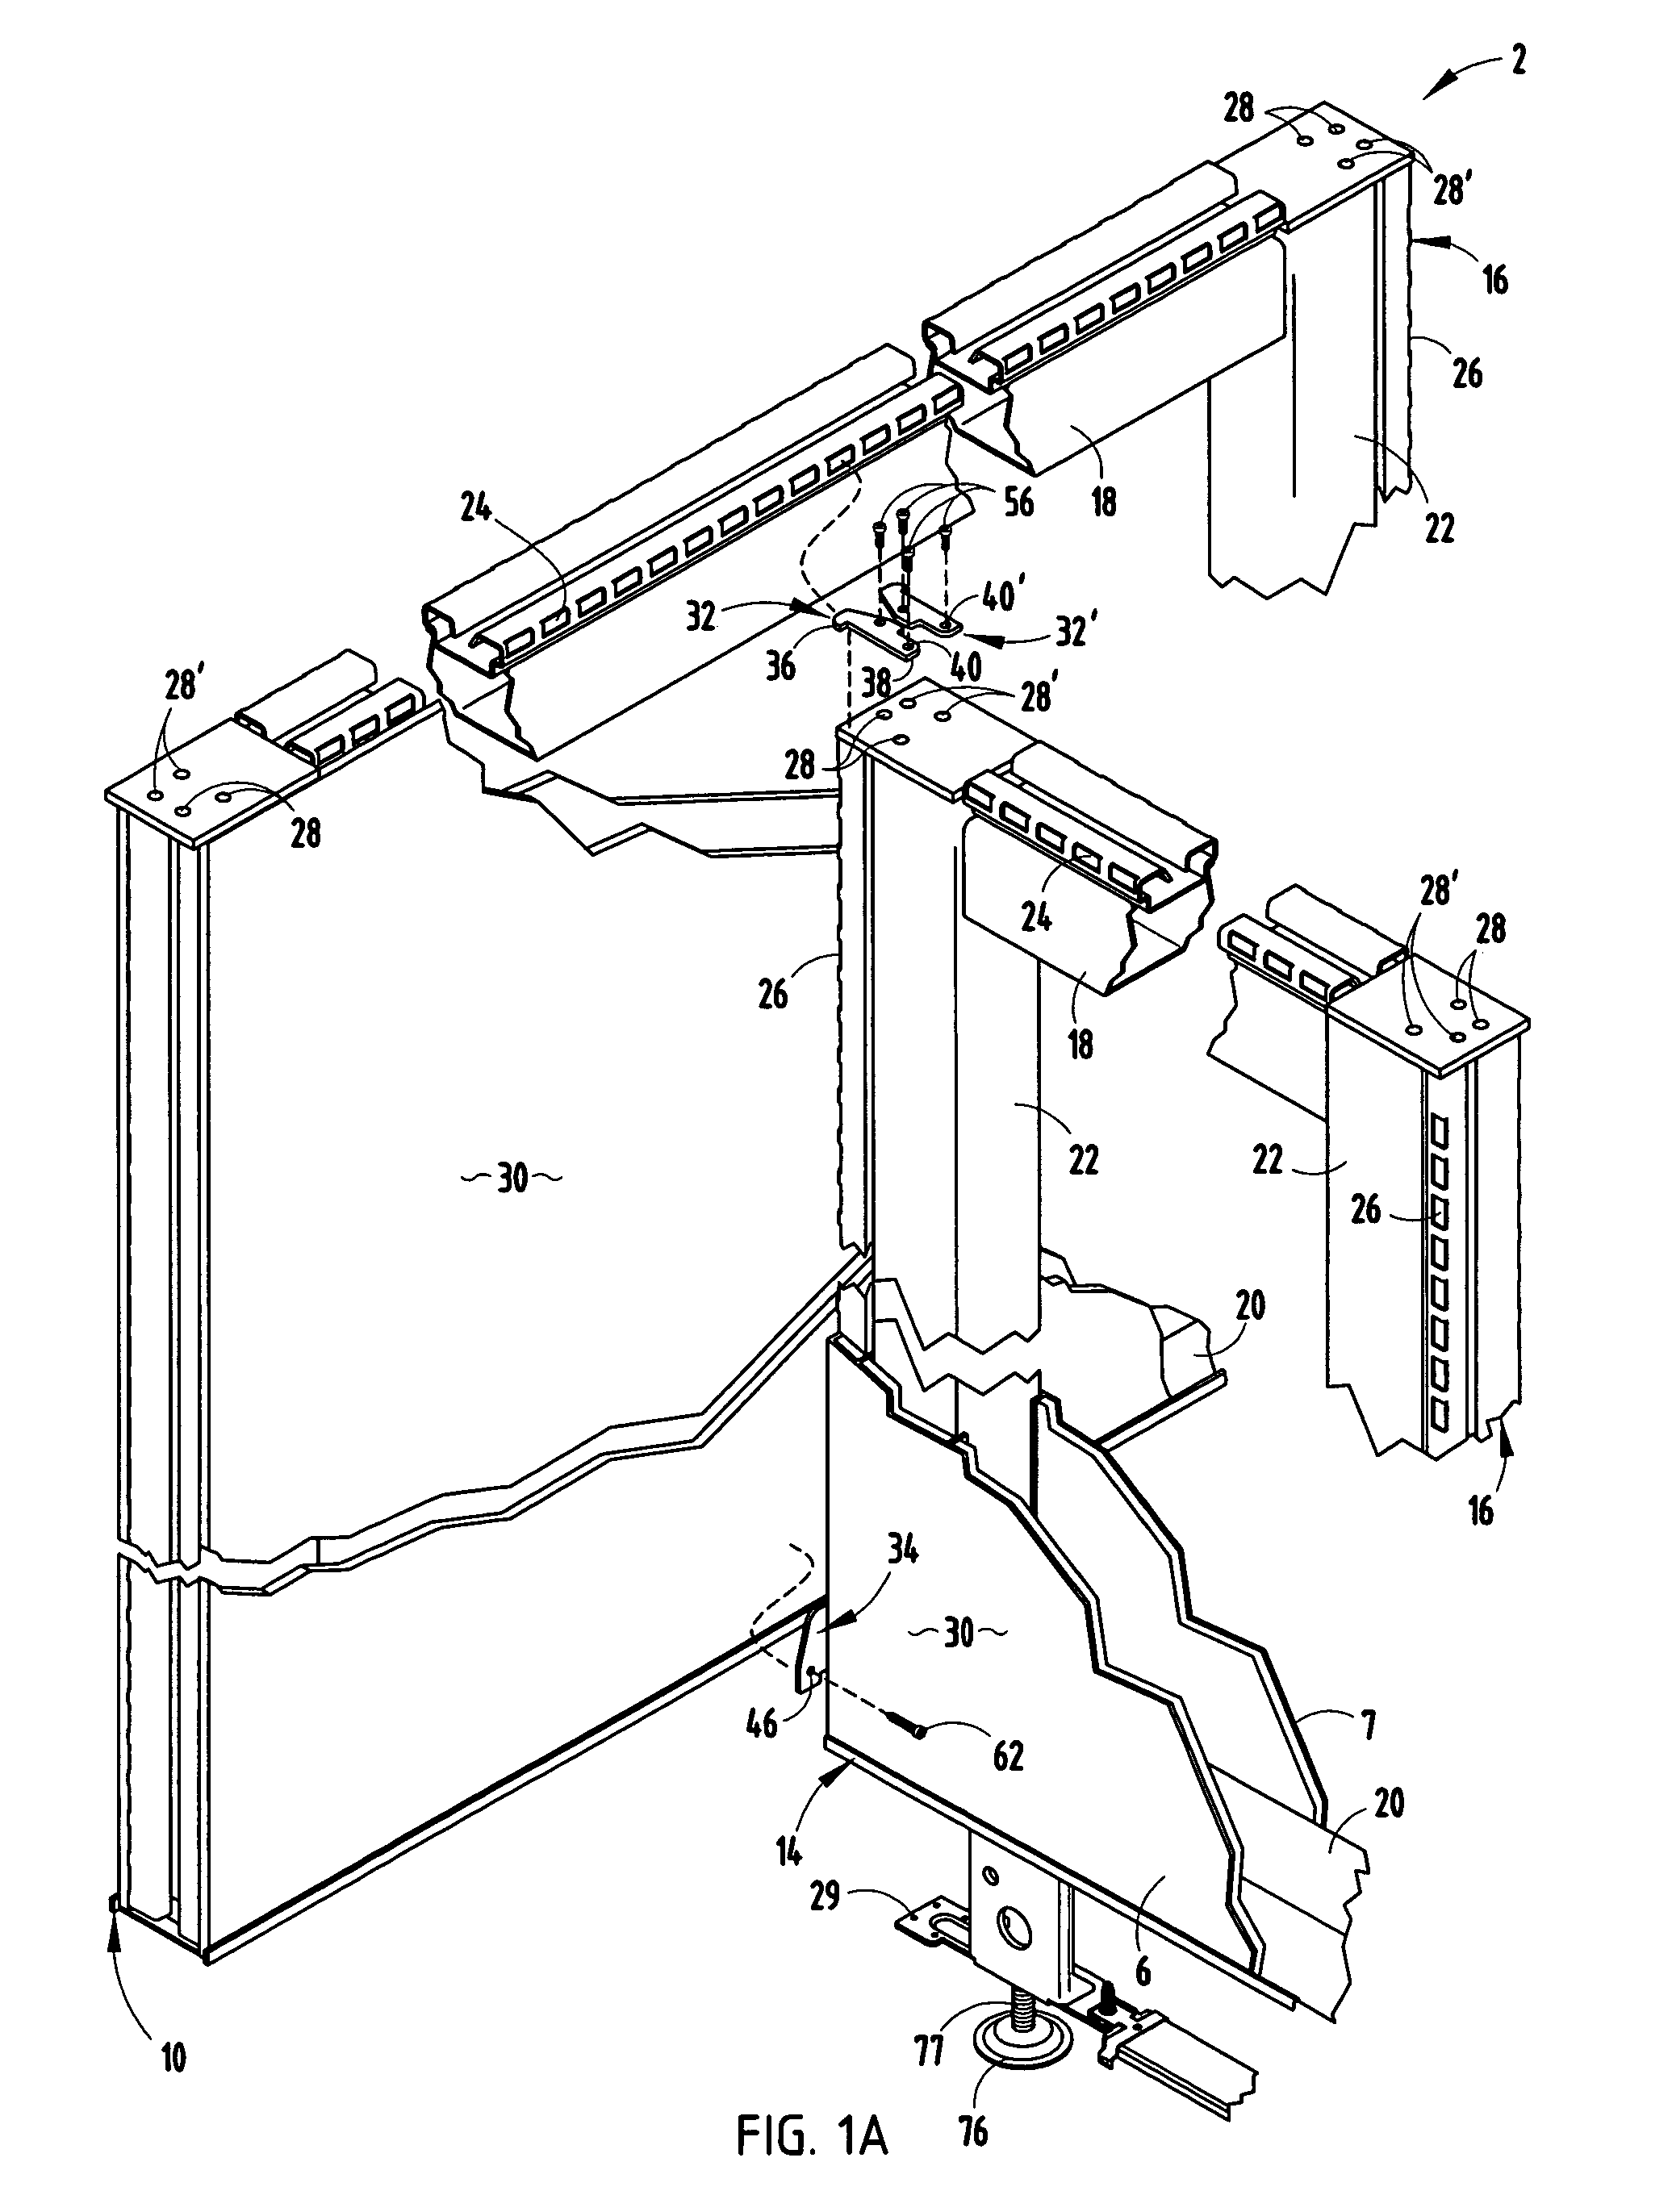 Partition panel system and method